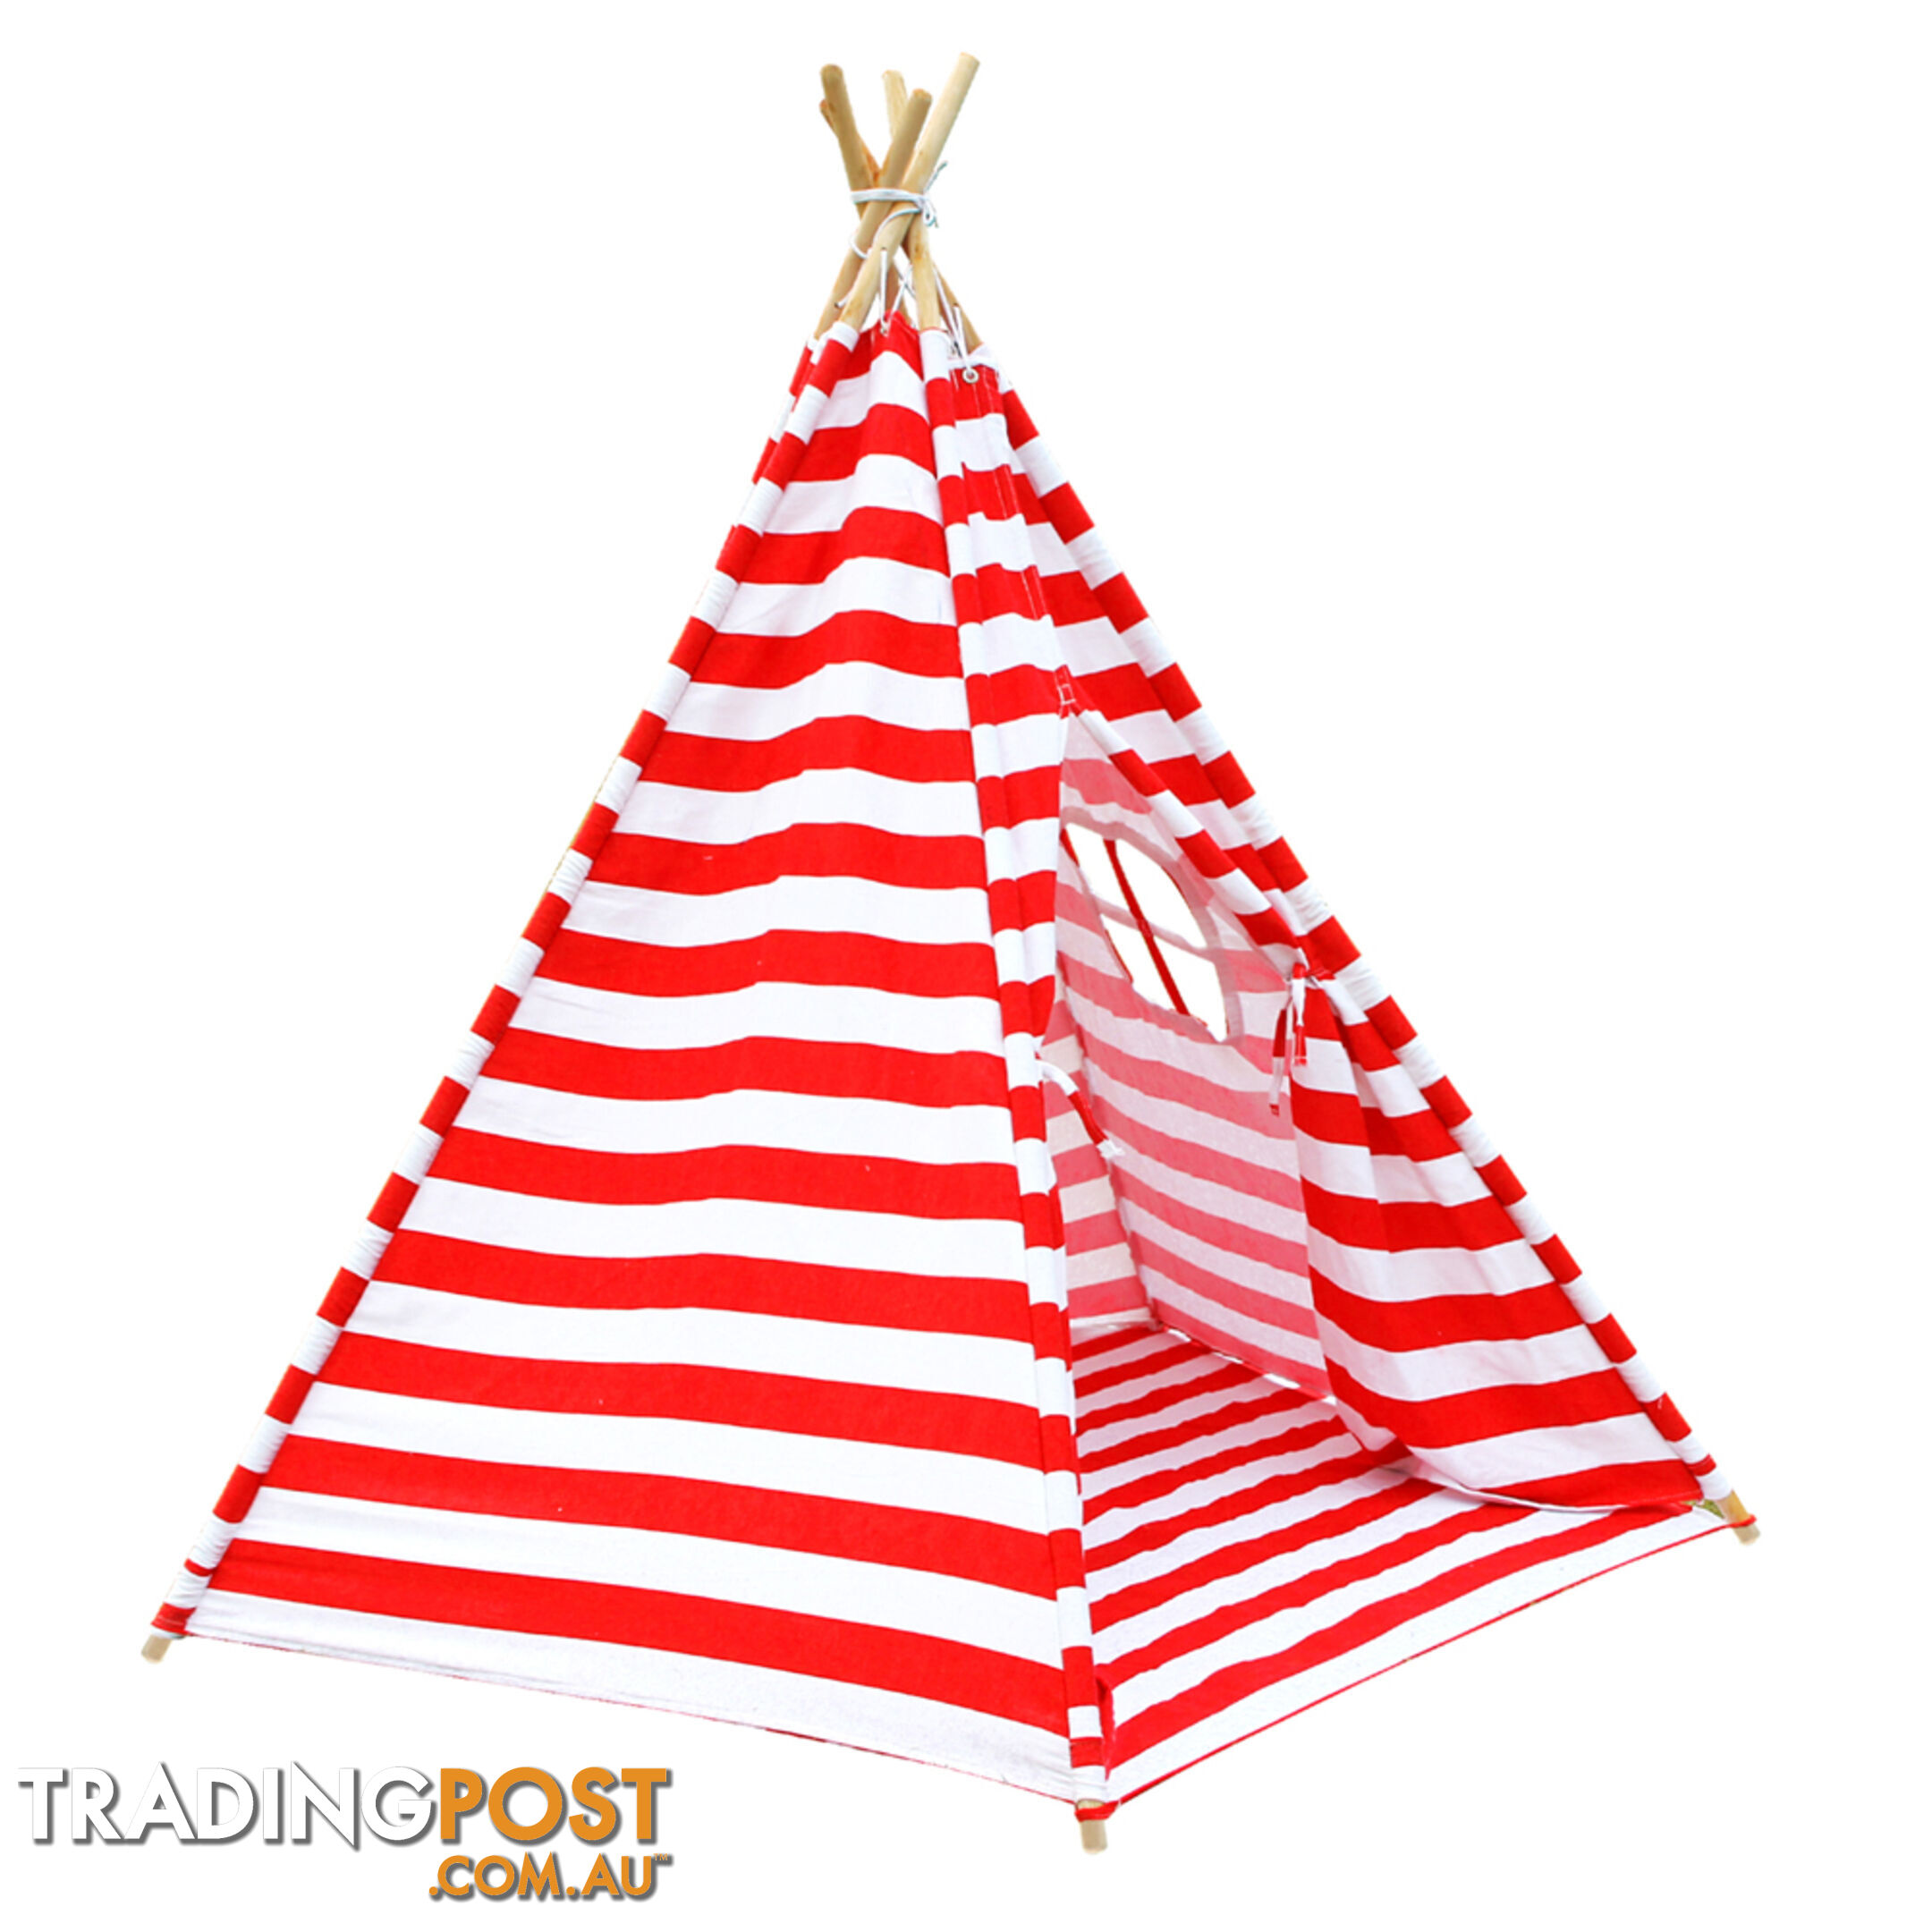 5 Poles Teepee Tent w/ Storage Bag Red